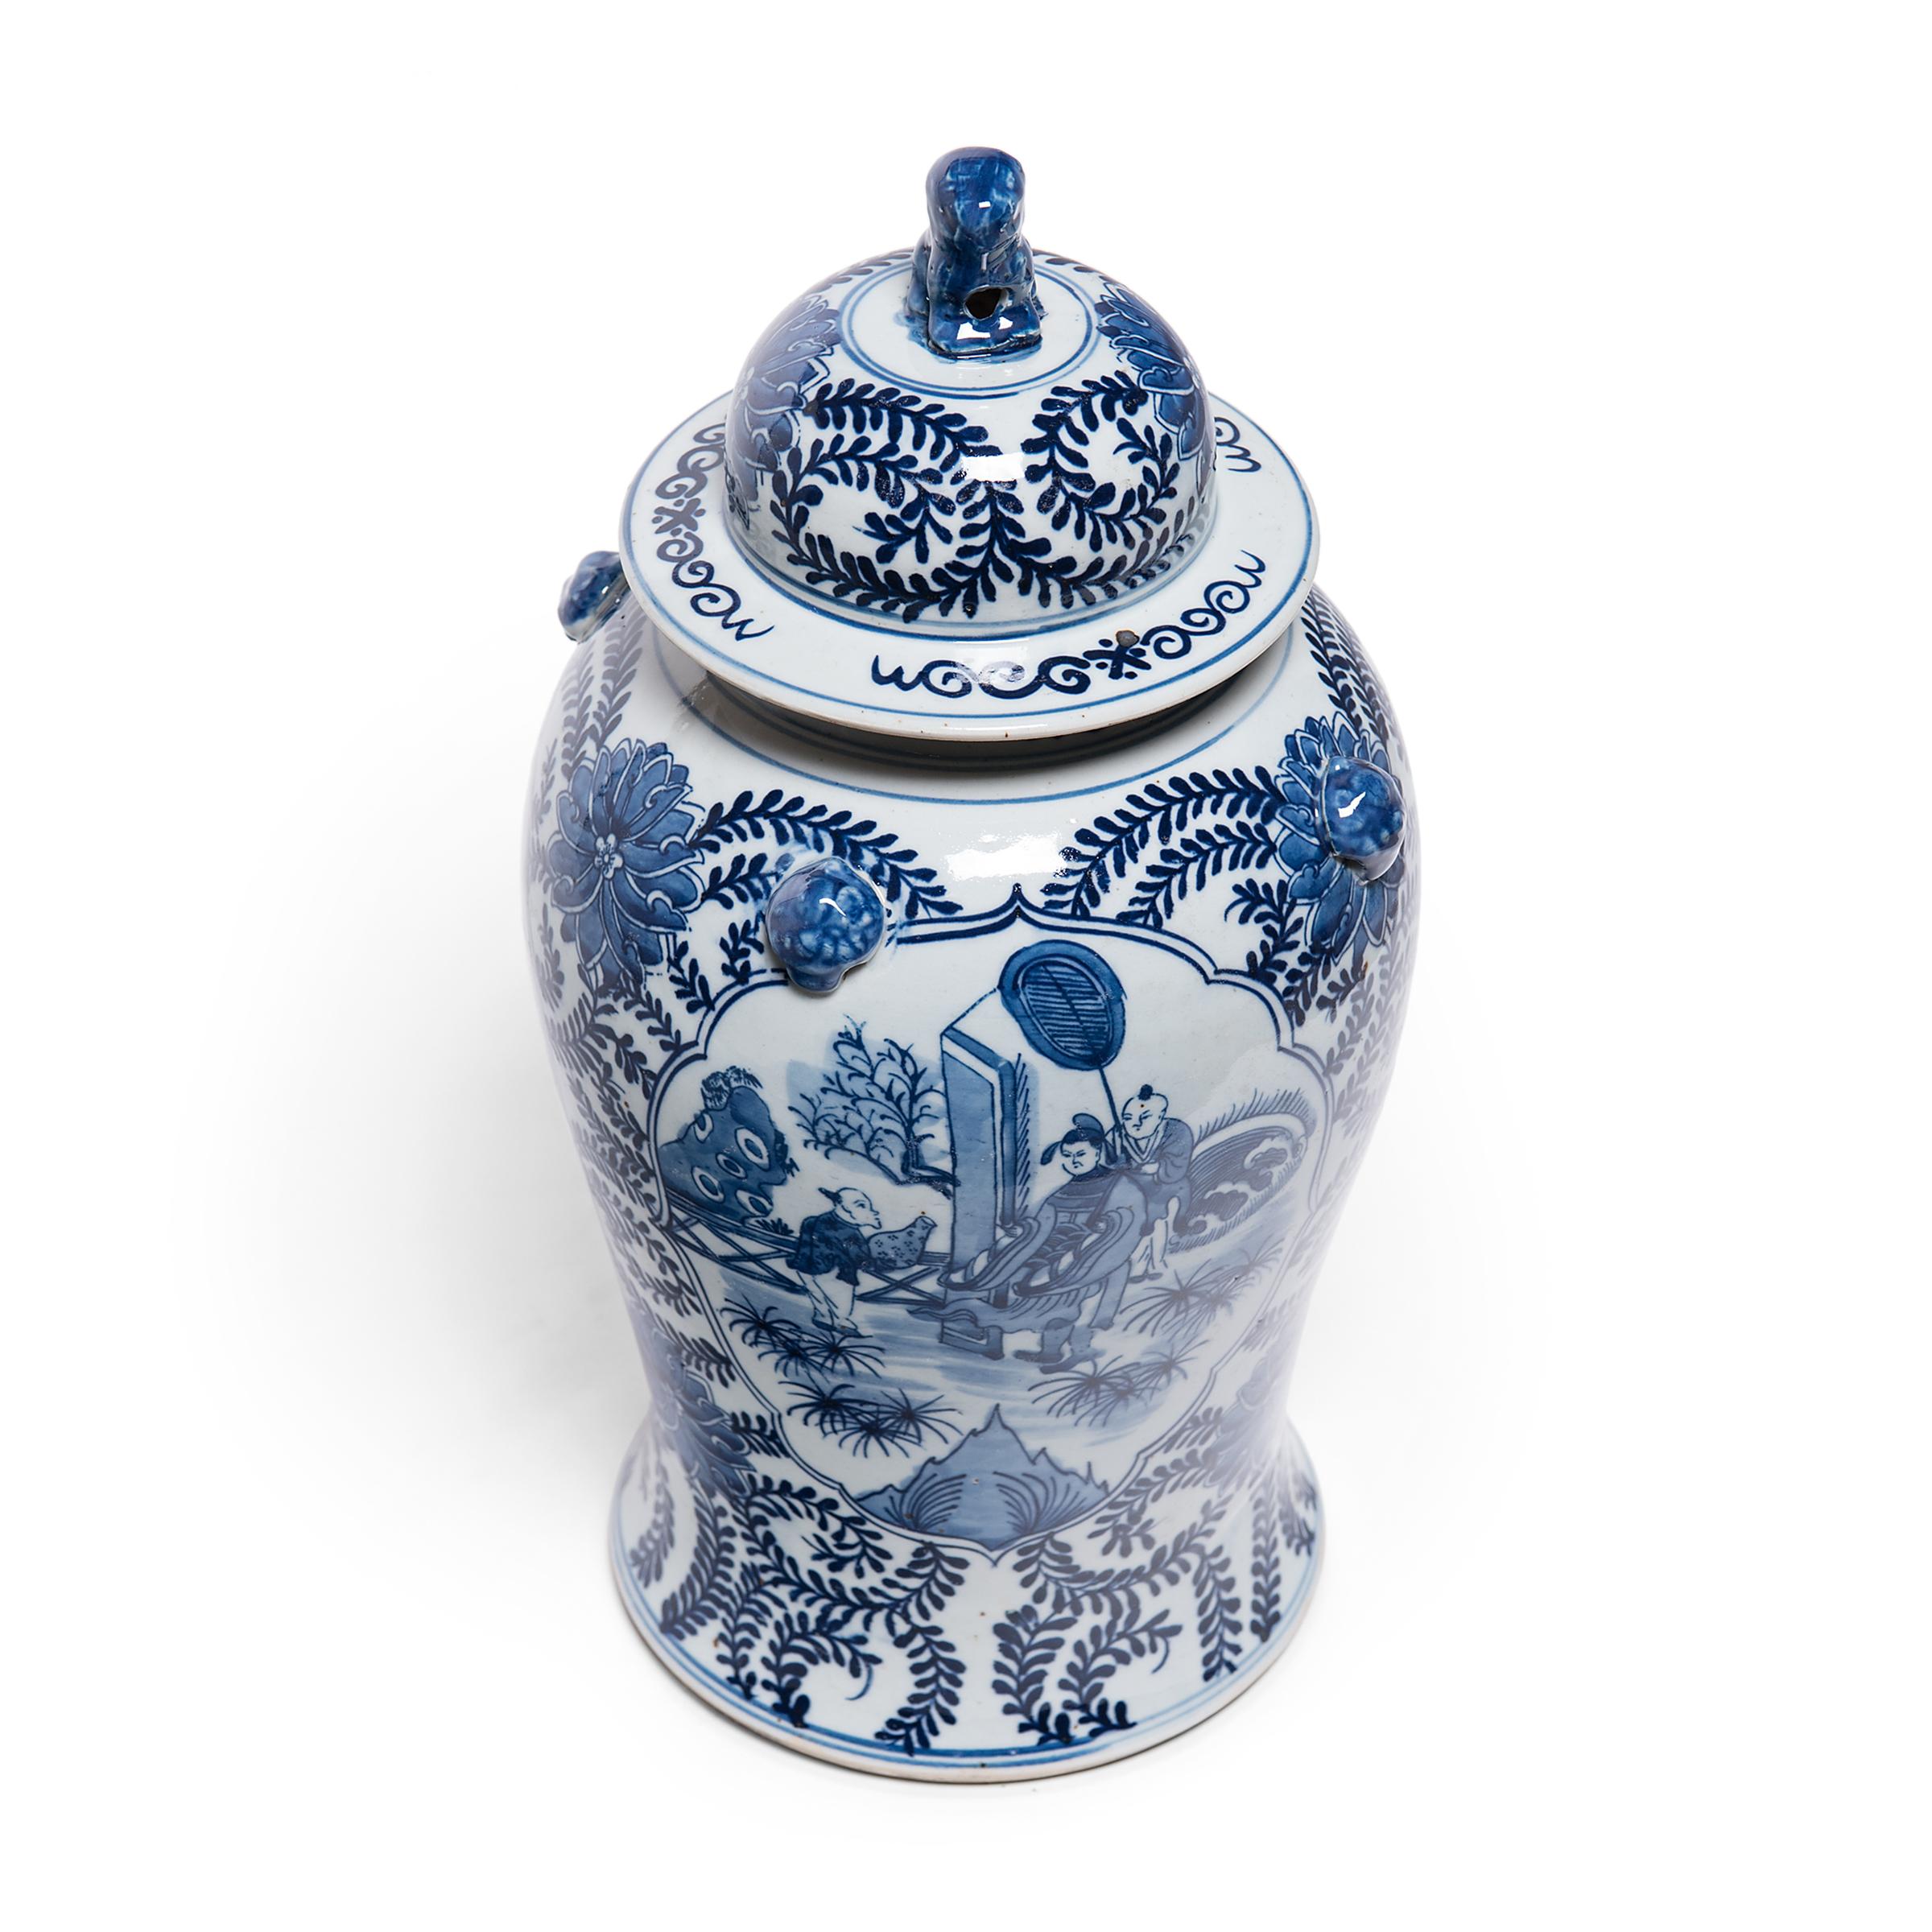 Porcelain Chinese Blue and White Perpetual Harmony Baluster Jar For Sale